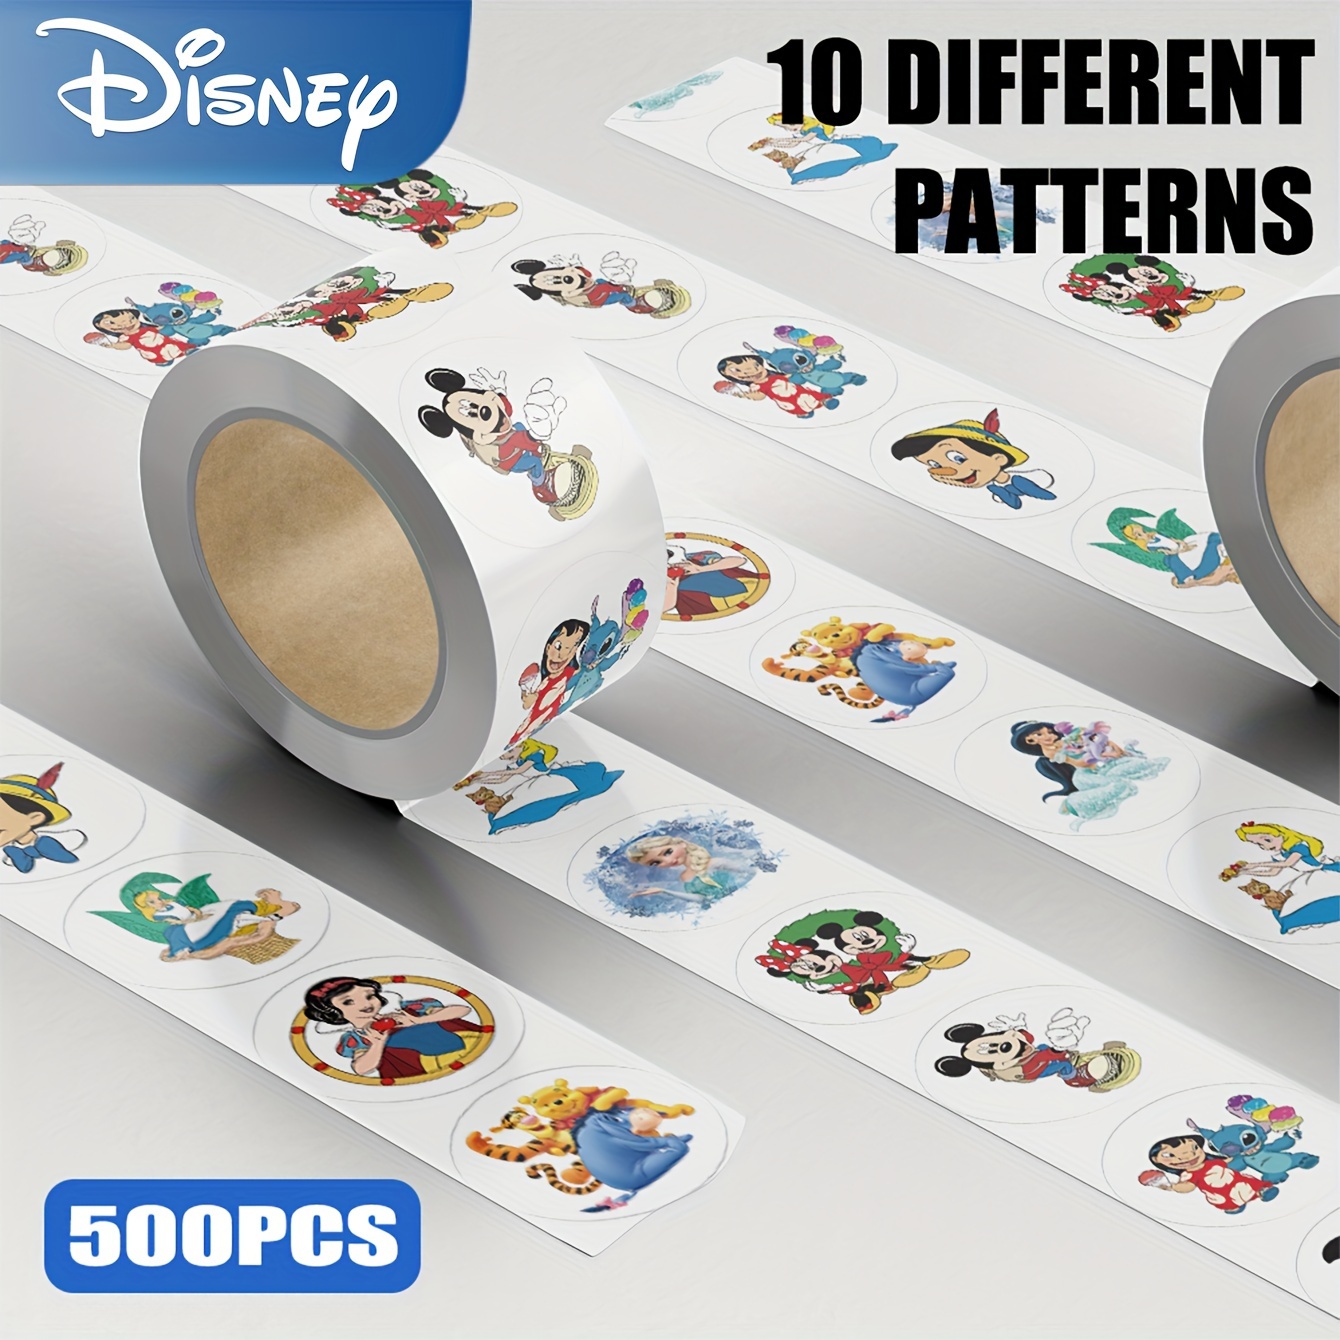 

Disney 500-piece Sticker Roll - Mickey, , Stitch & Princess Cartoon Decals For Laptops, Water Bottles, Phones & More - Cute Round Self-adhesive Paper Stickers